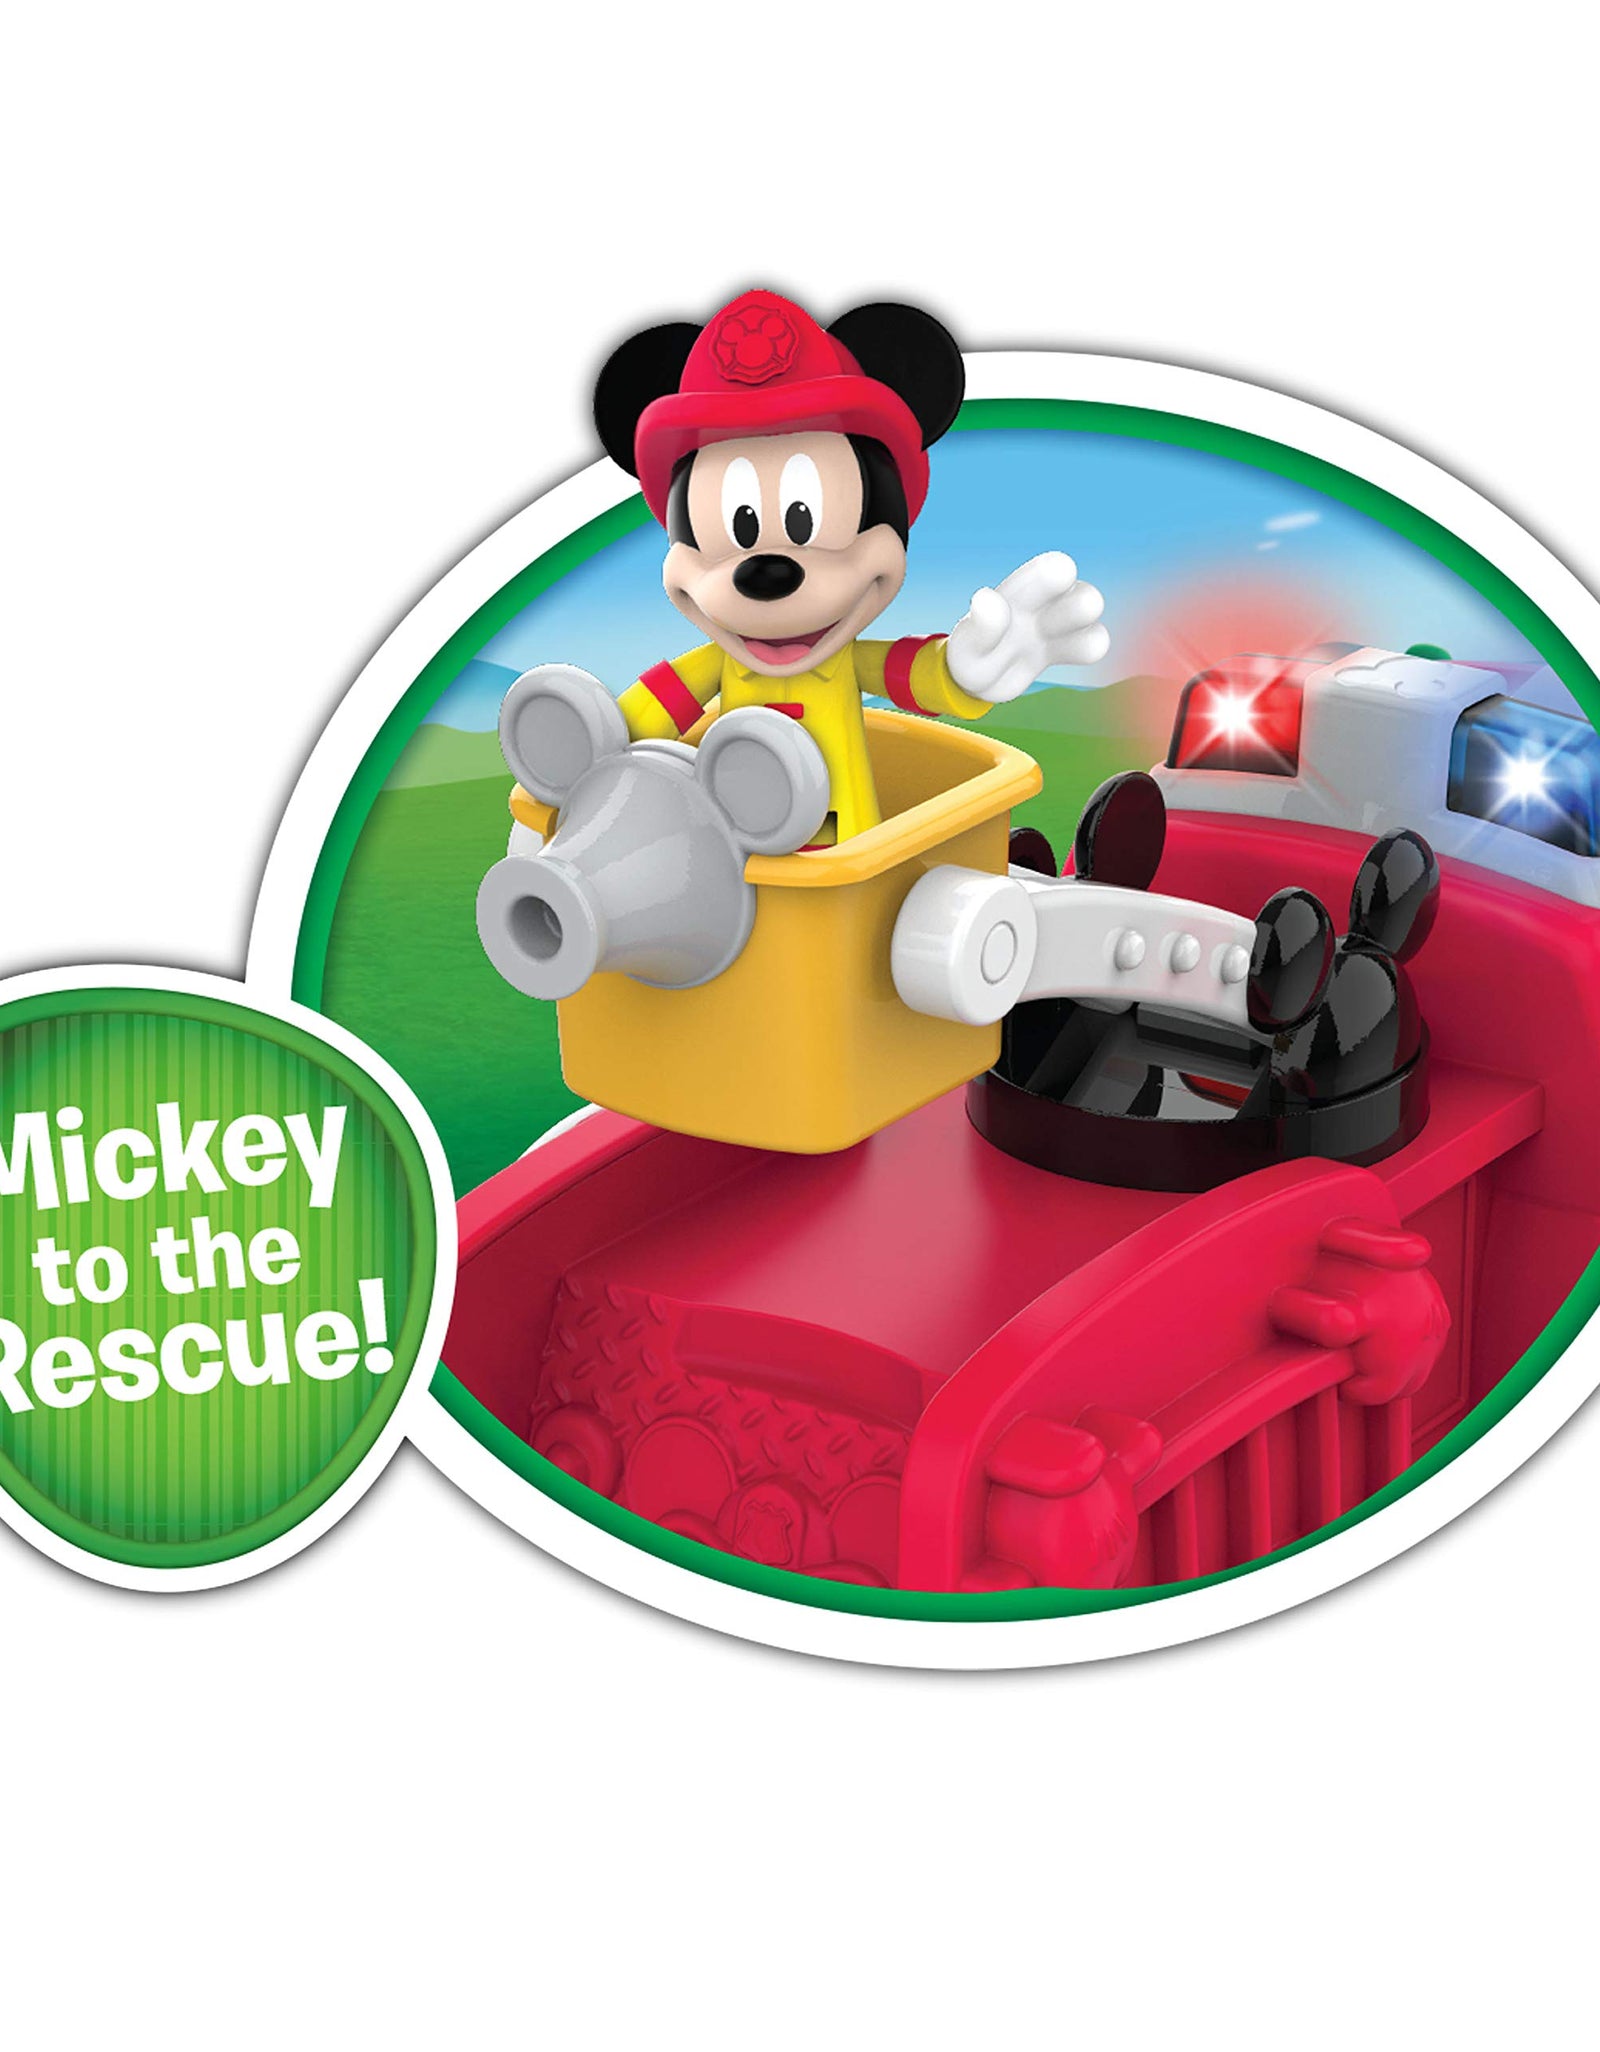 Disney’s Mickey Mouse Mickey’s Fire Engine, Fire Truck Toy with Lights and Sounds, by Just Play